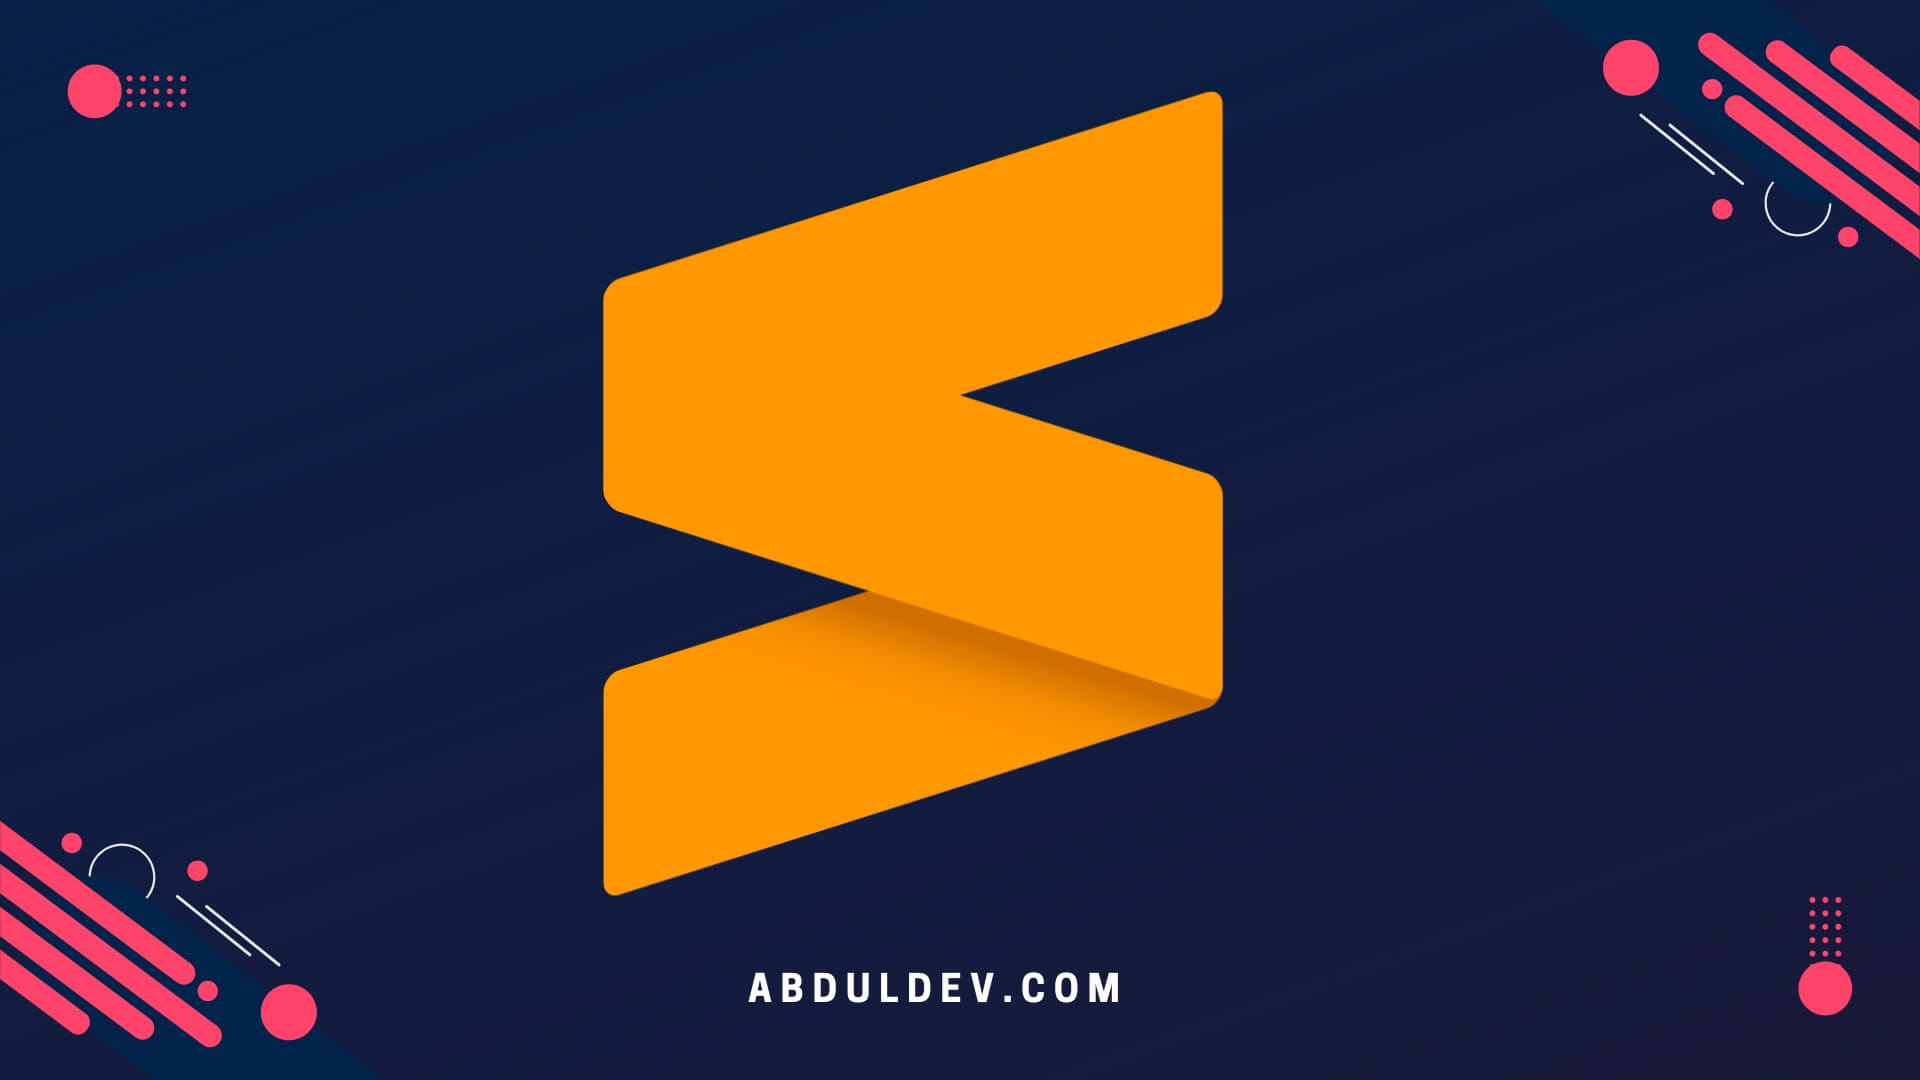 Sublime Text code editor